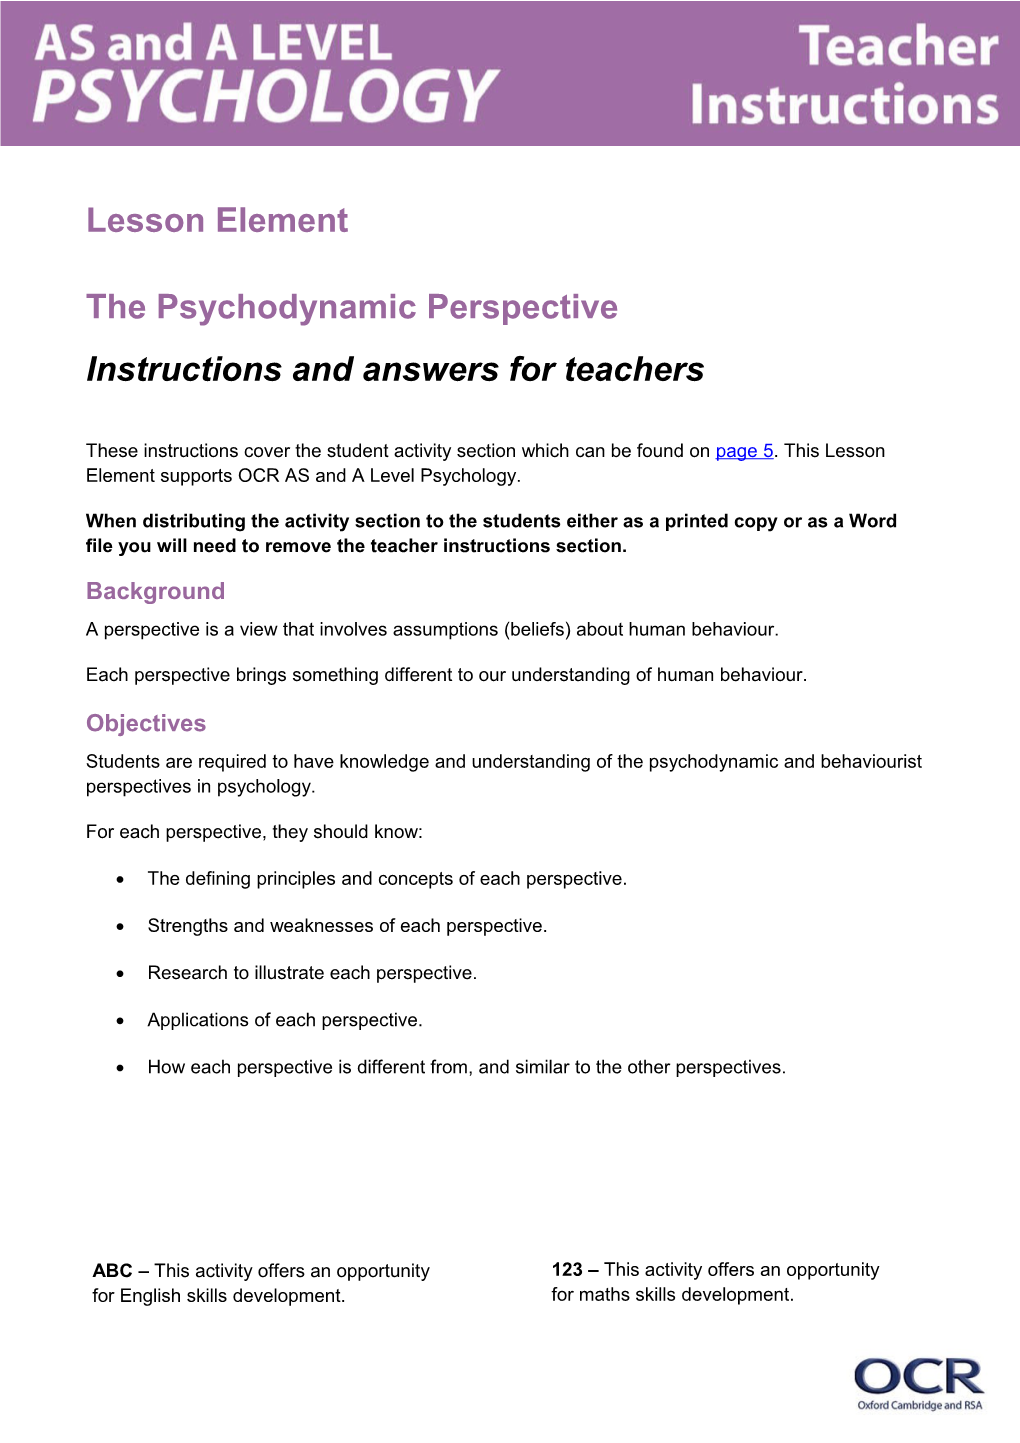 OCR AS and a Level Psychology Lesson Element the Psychodynamic Perspective